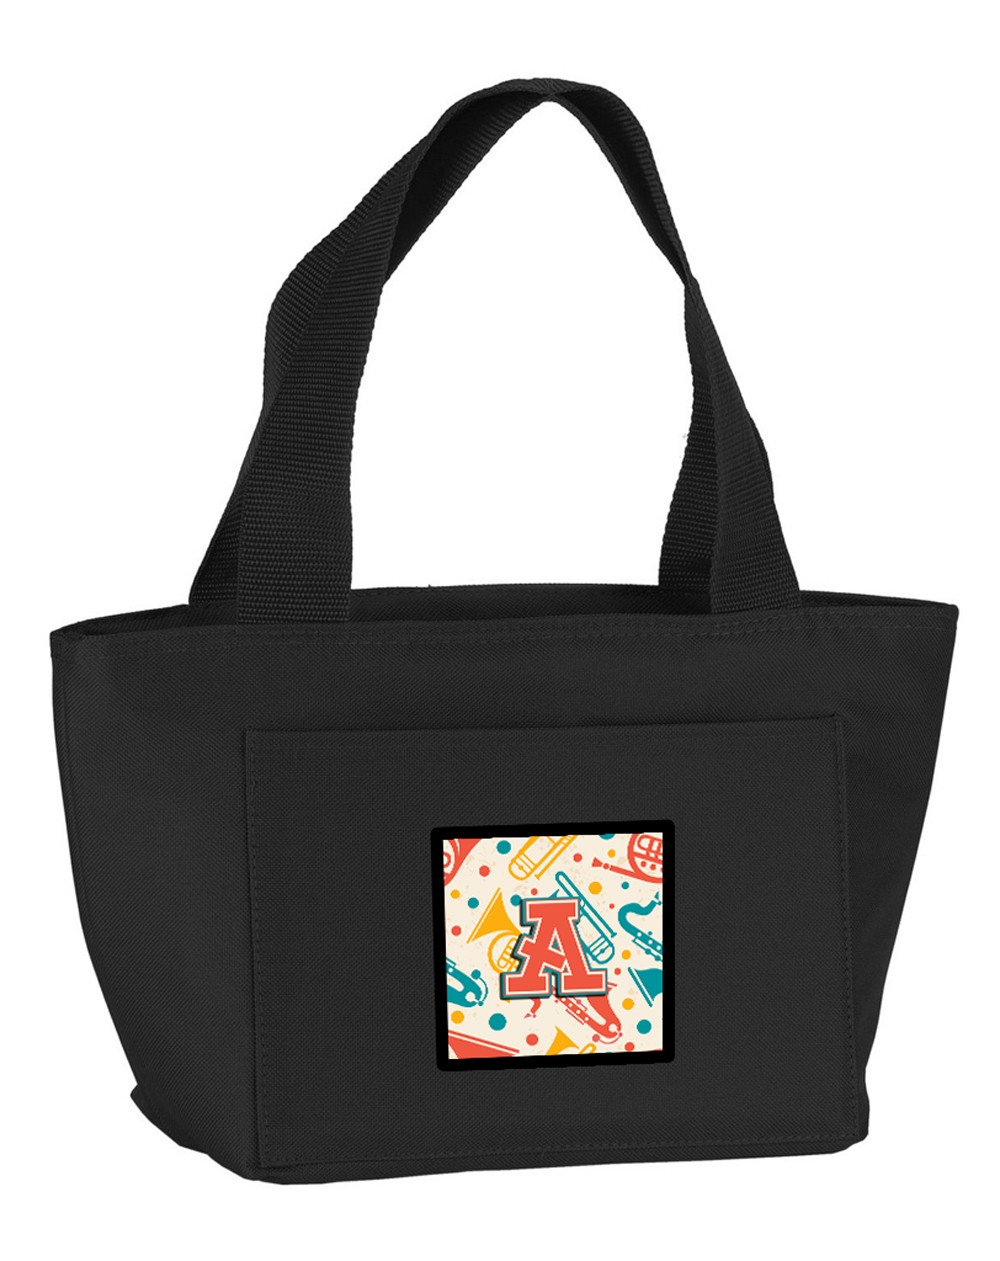 Letter A Retro Teal Orange Musical Instruments Initial Lunch Bag CJ2001-ABK-8808 by Caroline's Treasures